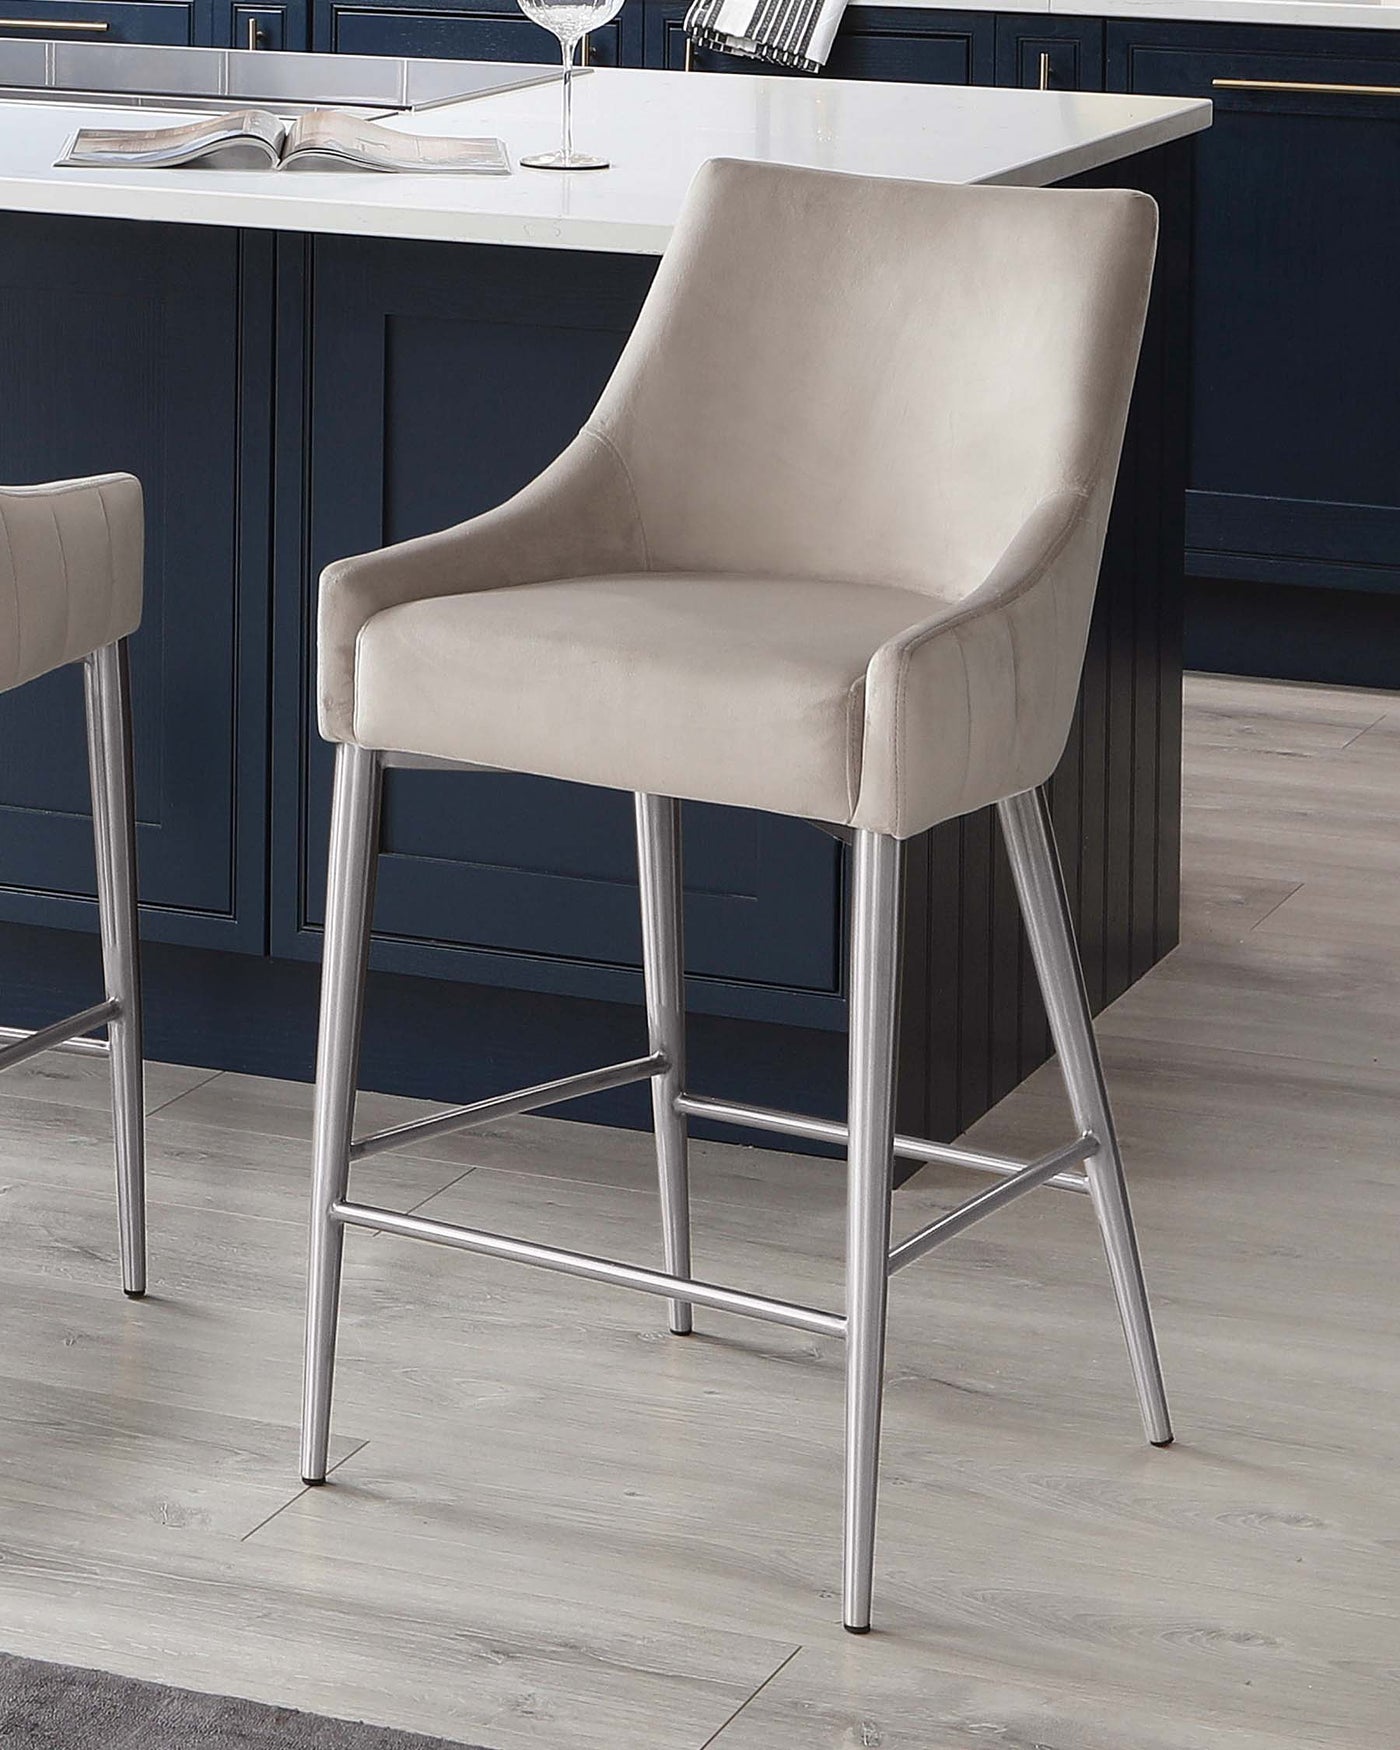 Elegant modern barstool with beige upholstery and sleek chrome legs, featuring a comfortable backrest and armrests. Positioned next to a kitchen island with dark blue cabinetry and white countertop.